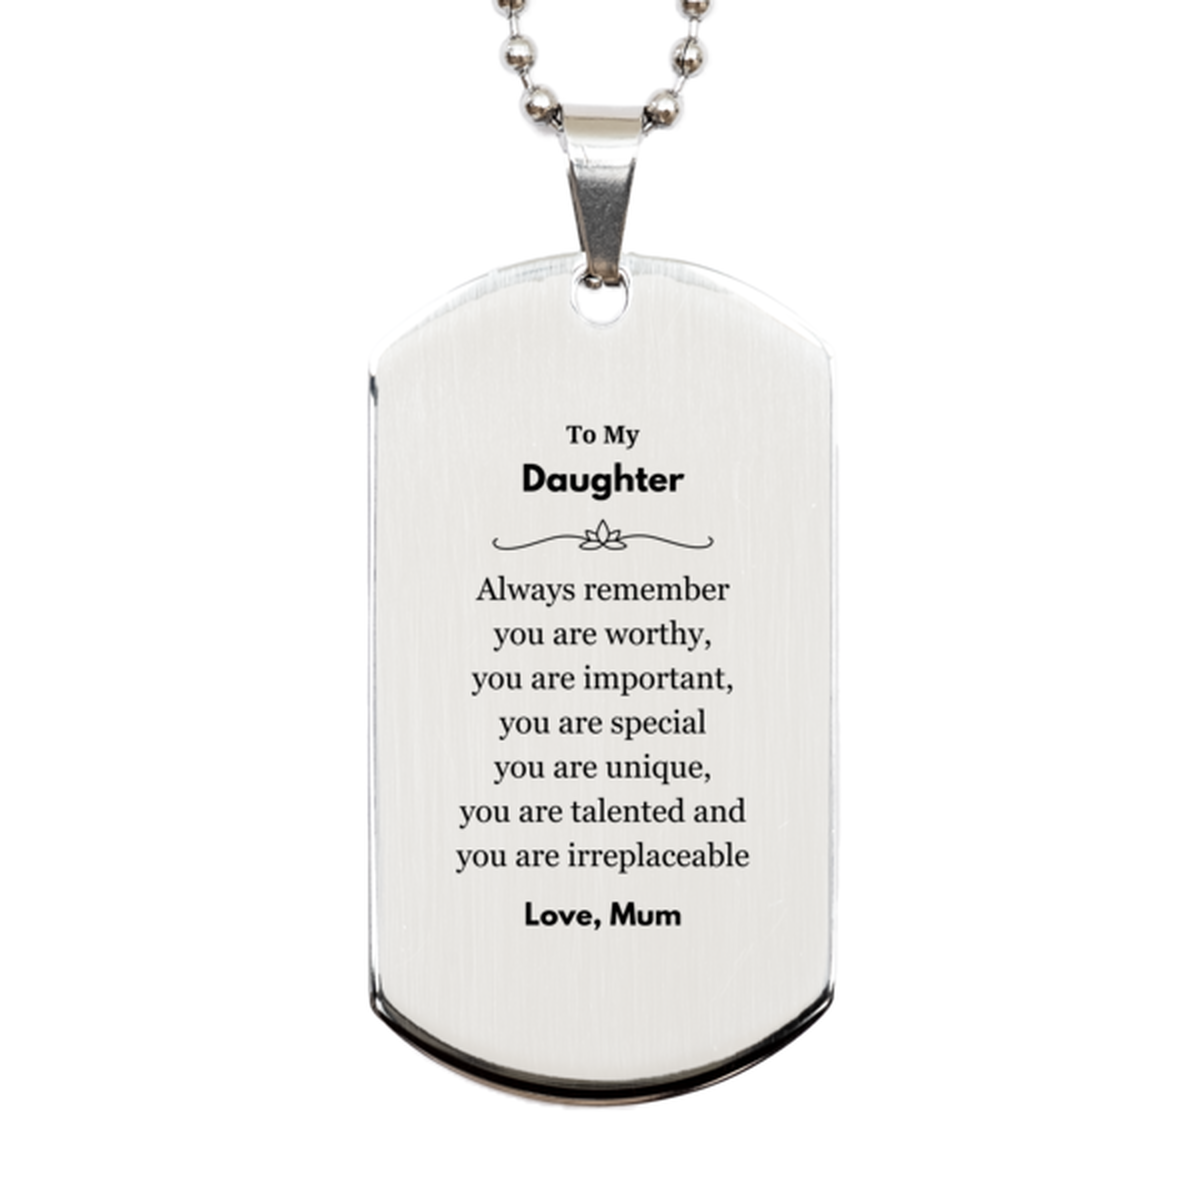 Daughter Birthday Gifts from Mum, Inspirational Silver Dog Tag for Daughter Christmas Graduation Gifts for Daughter Always remember you are worthy, you are important. Love, Mum